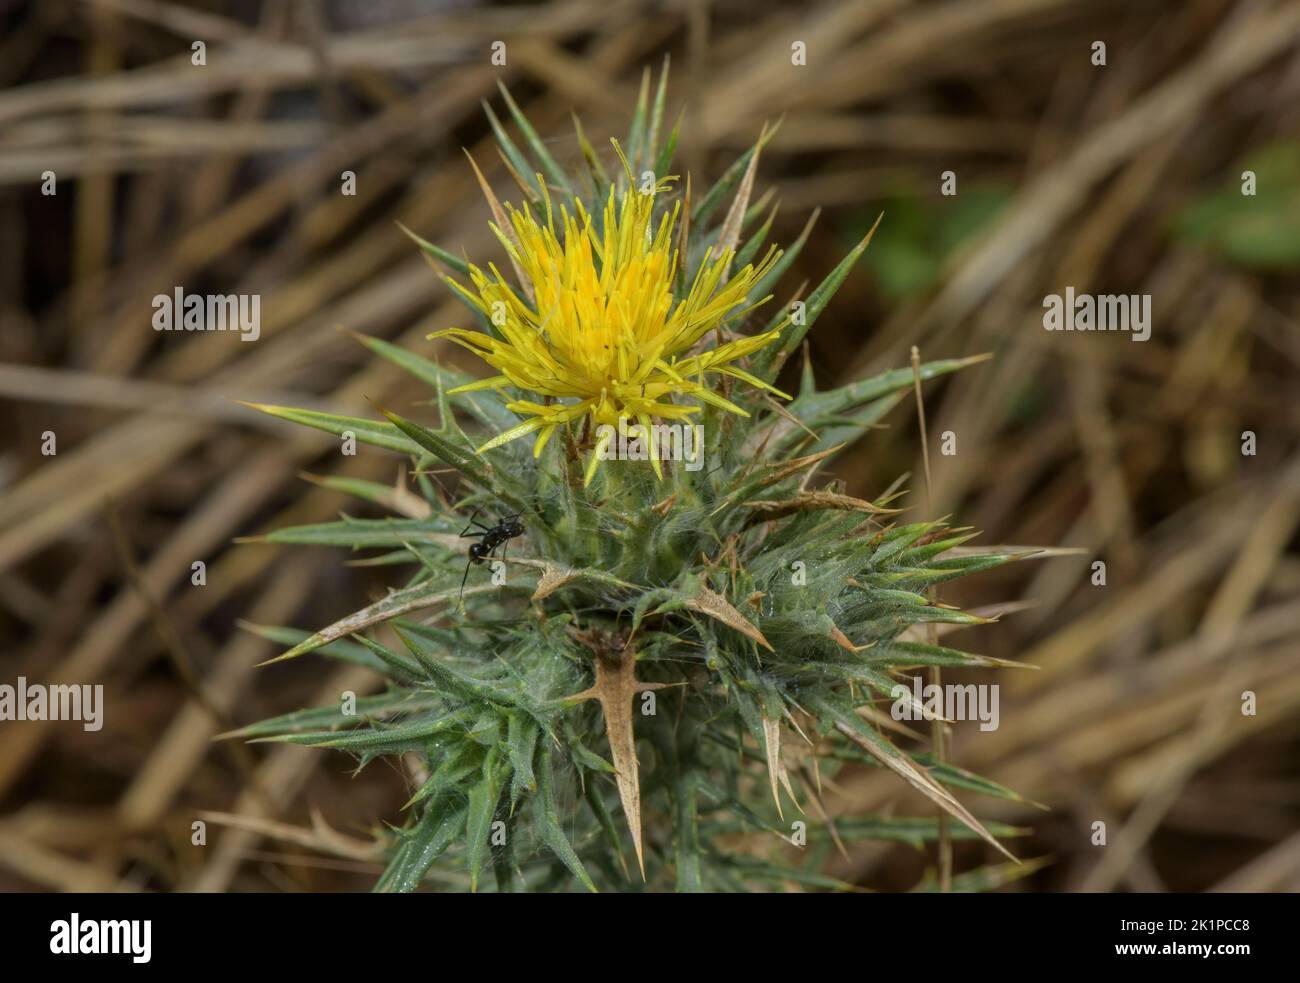 Downy safflower, Carthamus lanatus, in flower in lowland Pyrenees. Invasive weed in some areas. Stock Photo